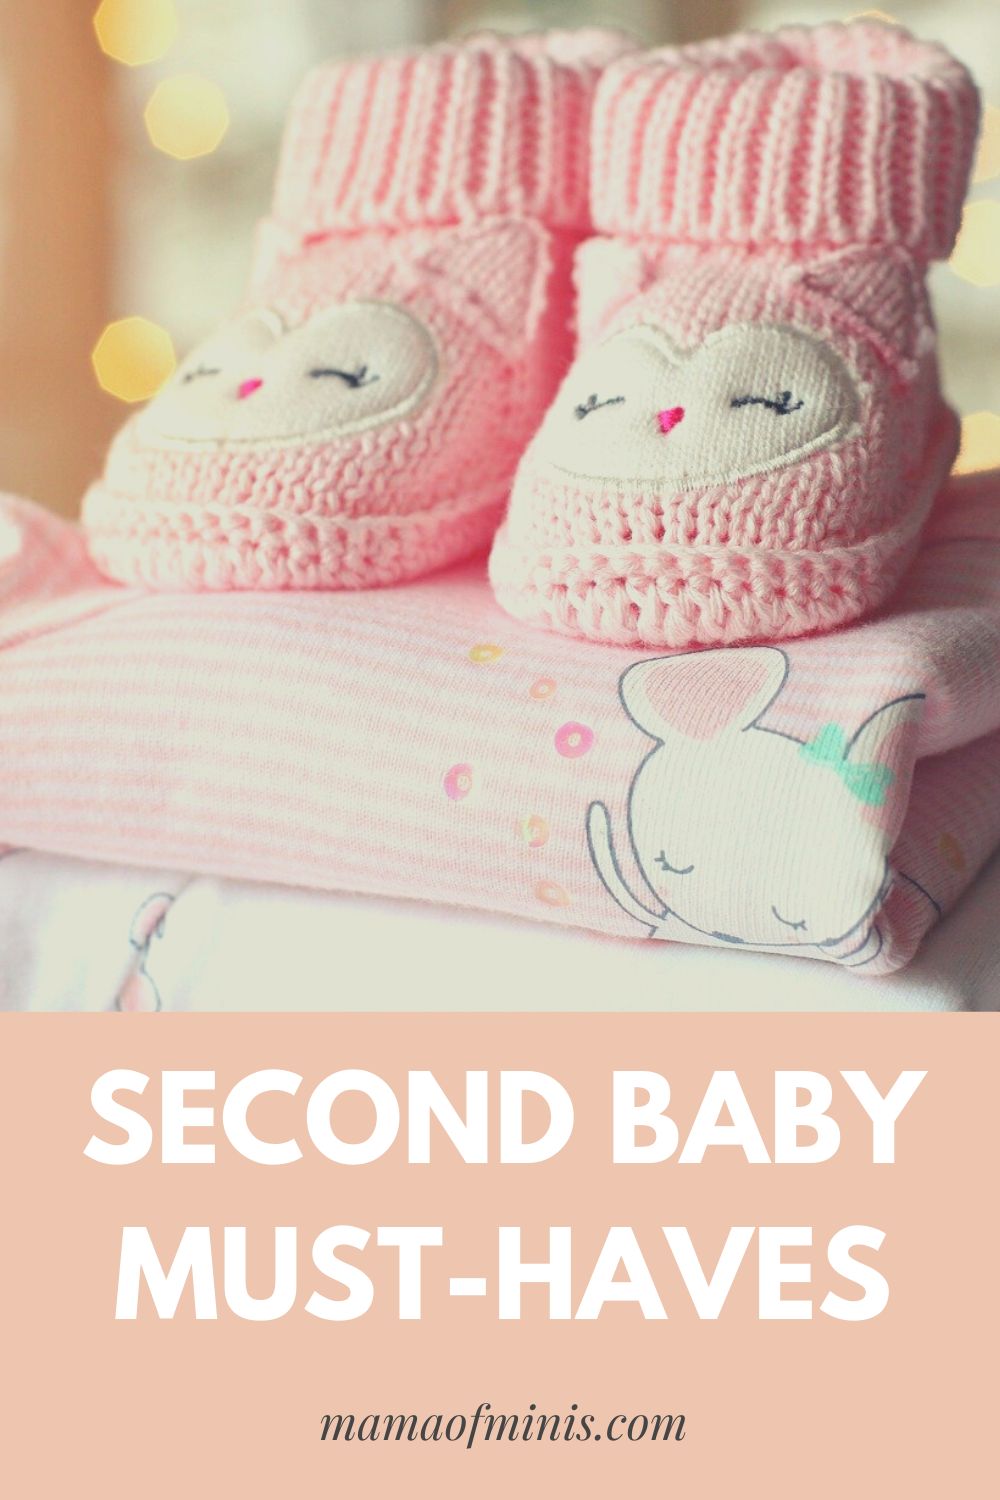 Second Baby Must-Haves